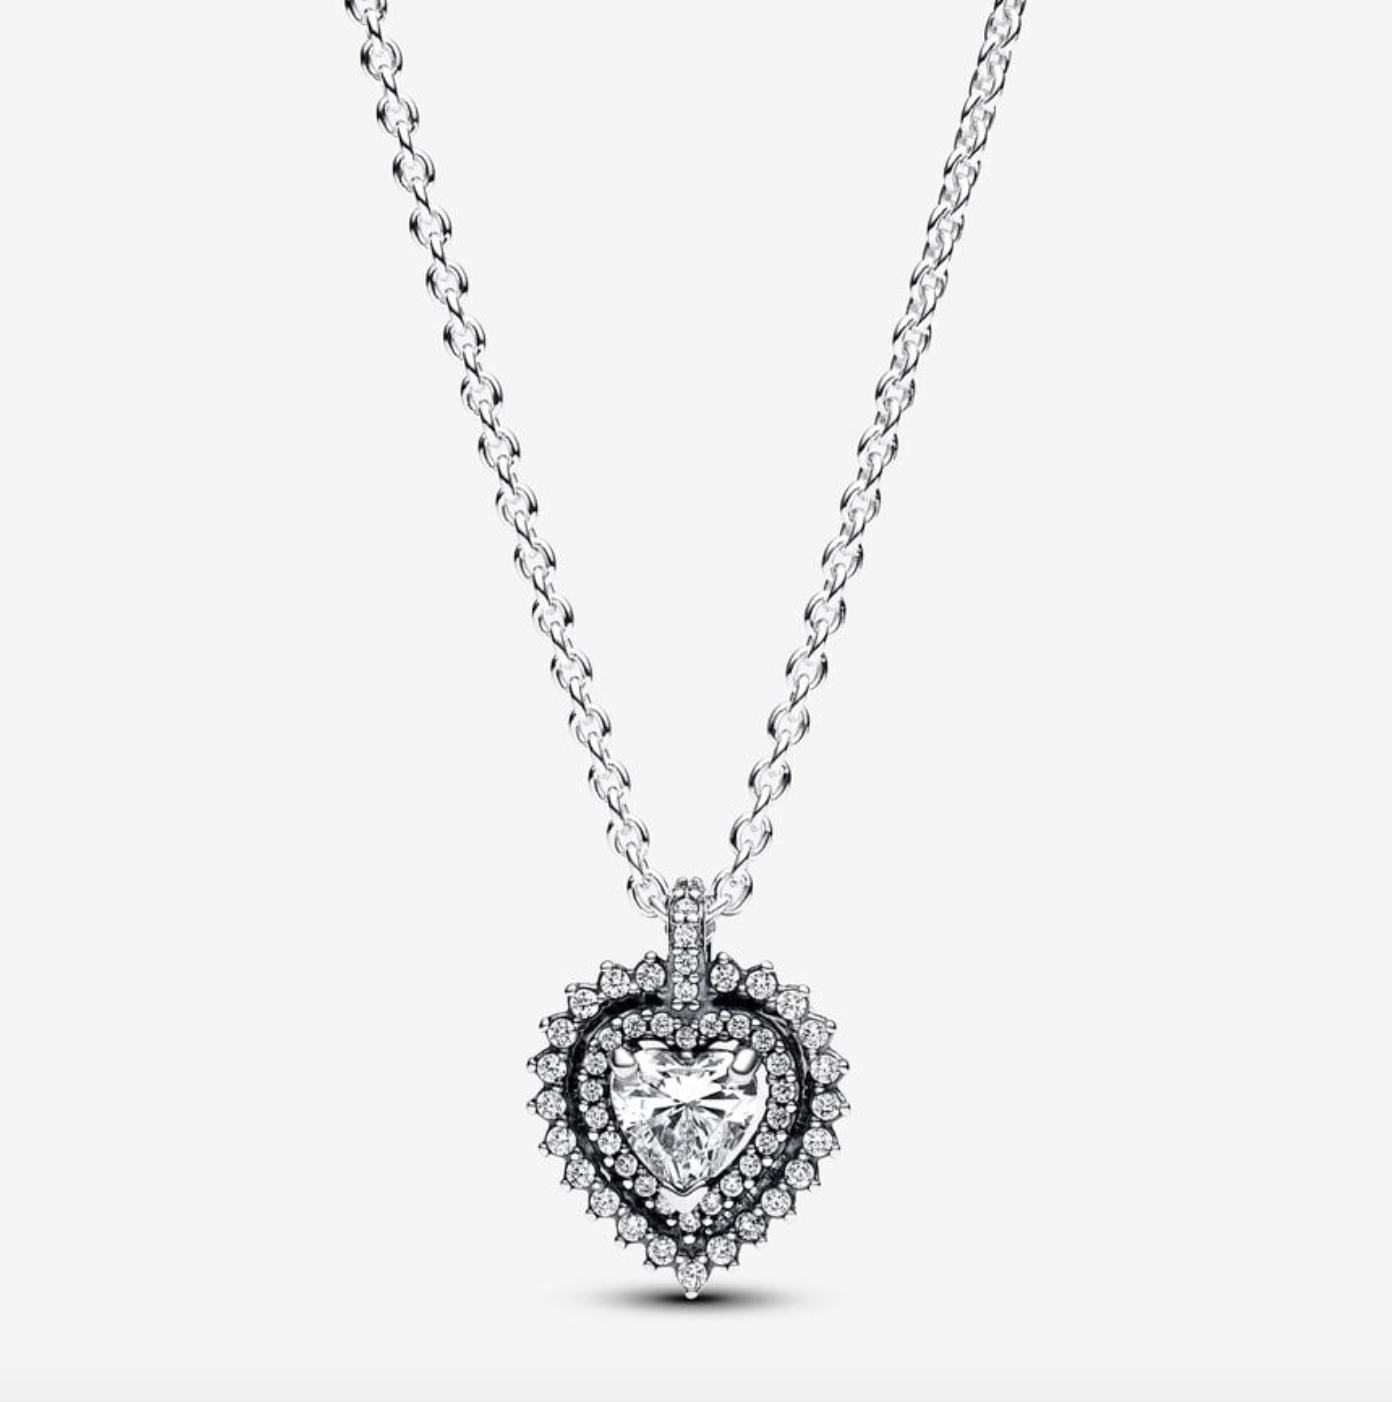 XIAQUJ Lady Double Heart Shaped Sparkling Diamond Necklace Collar Chain  Neck Chain Sweater Chain Jewelry Layered Love Zircon Necklace Pendant  Handmade Exquisite Necklace Necklaces & Pendants Silver - Walmart.com